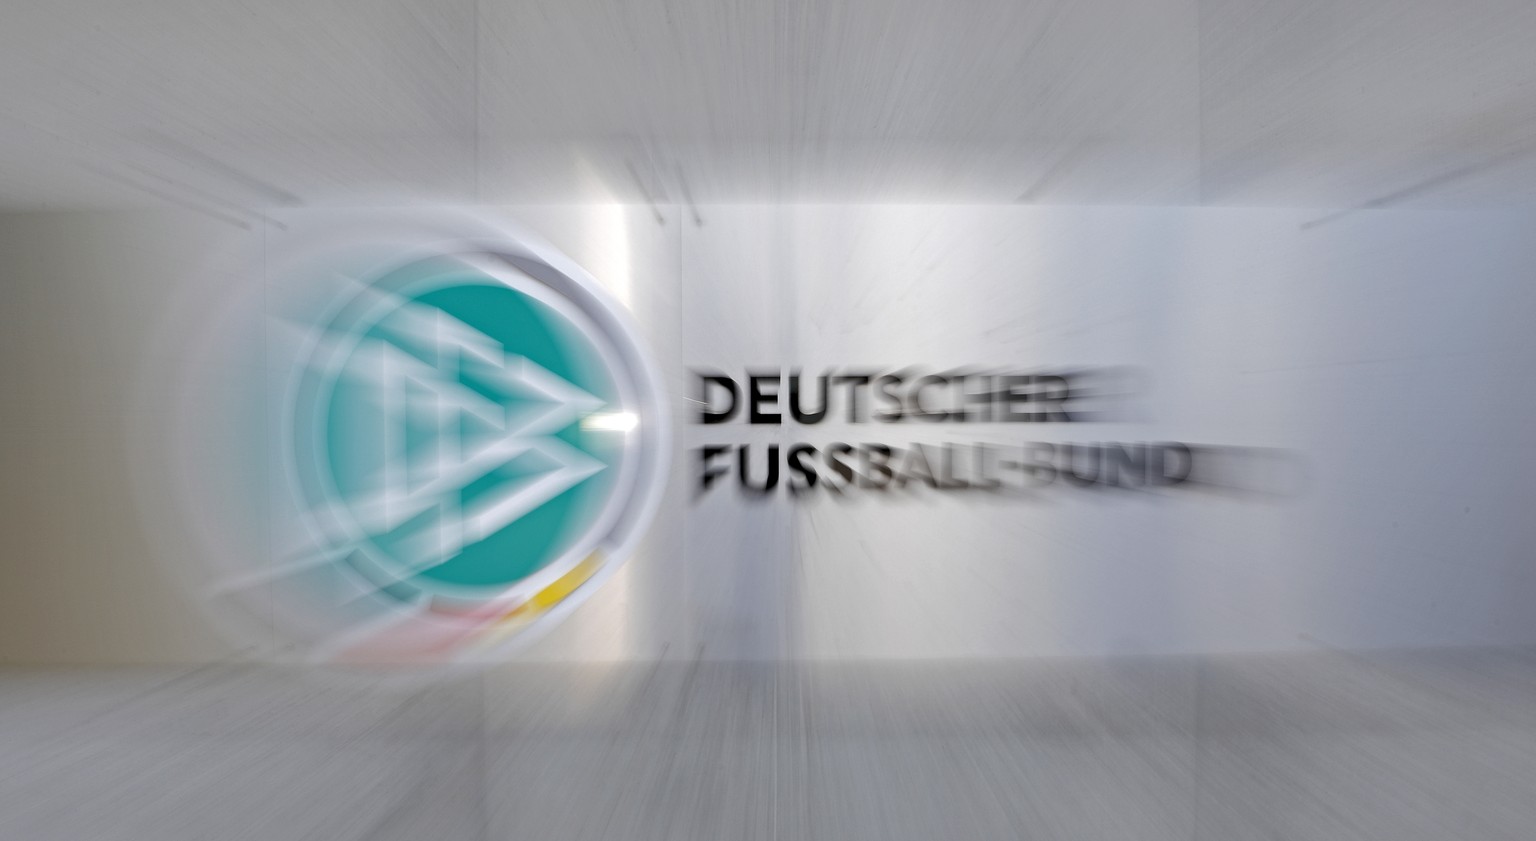 epa06906200 A view of a Logo of the DFB, German Soccer Federation, at the headquarters in Frankfurt, Germany, 23 July 2018. EPA/RONALD WITTEK